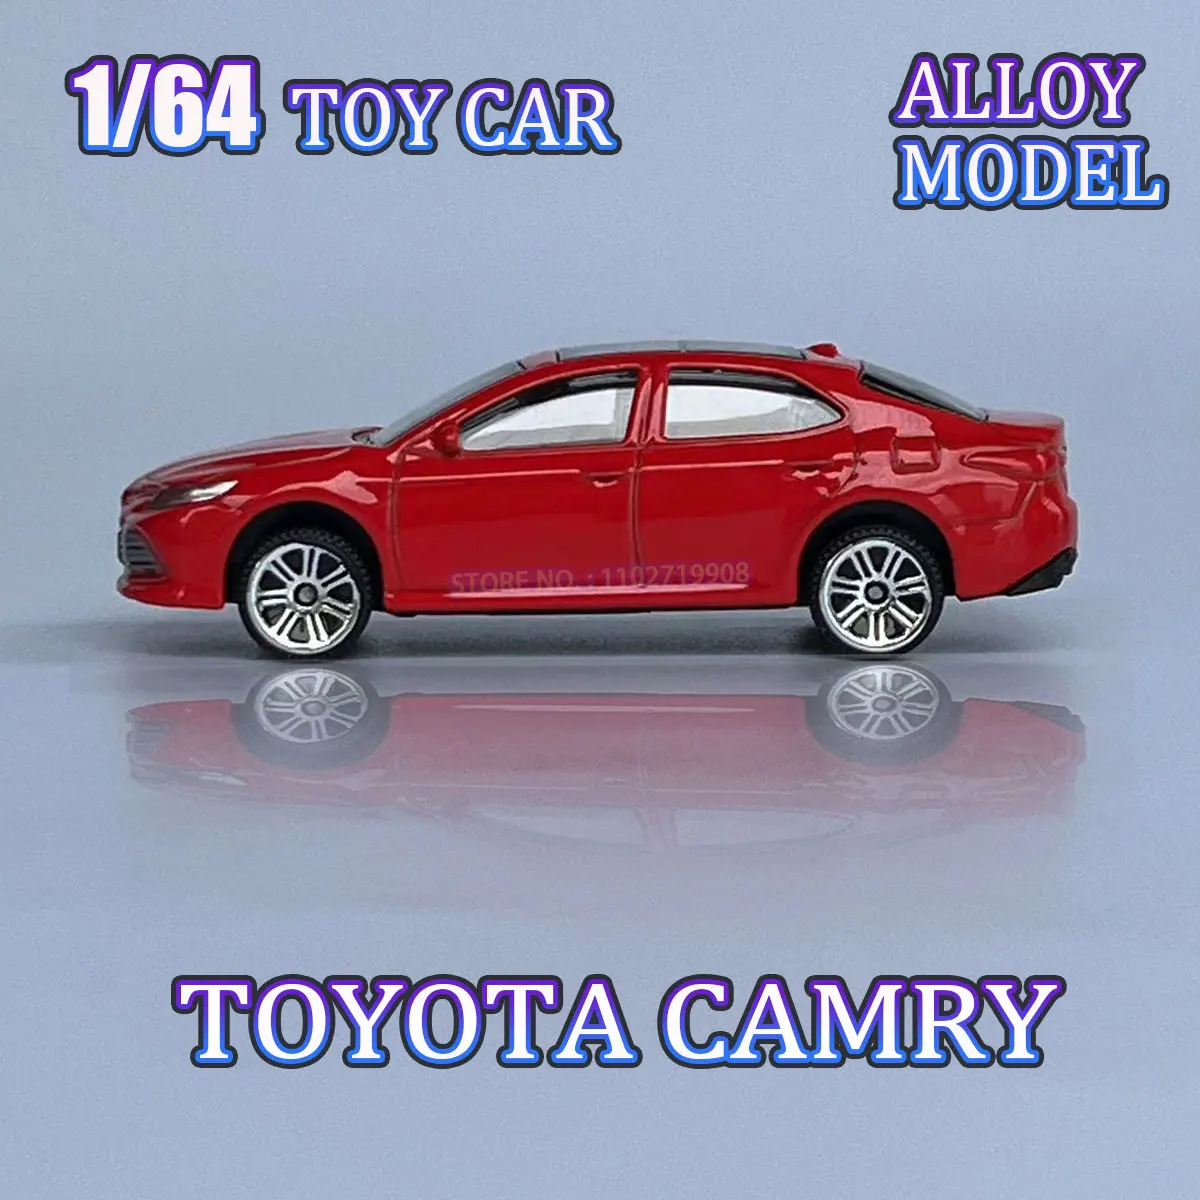 

TOYOTA CANRY, Replica, Diecast Car Model, Vehicle Interior Decor, Ornament, Xmas Gift for Kid, Boy Toy, 1/64 Scale